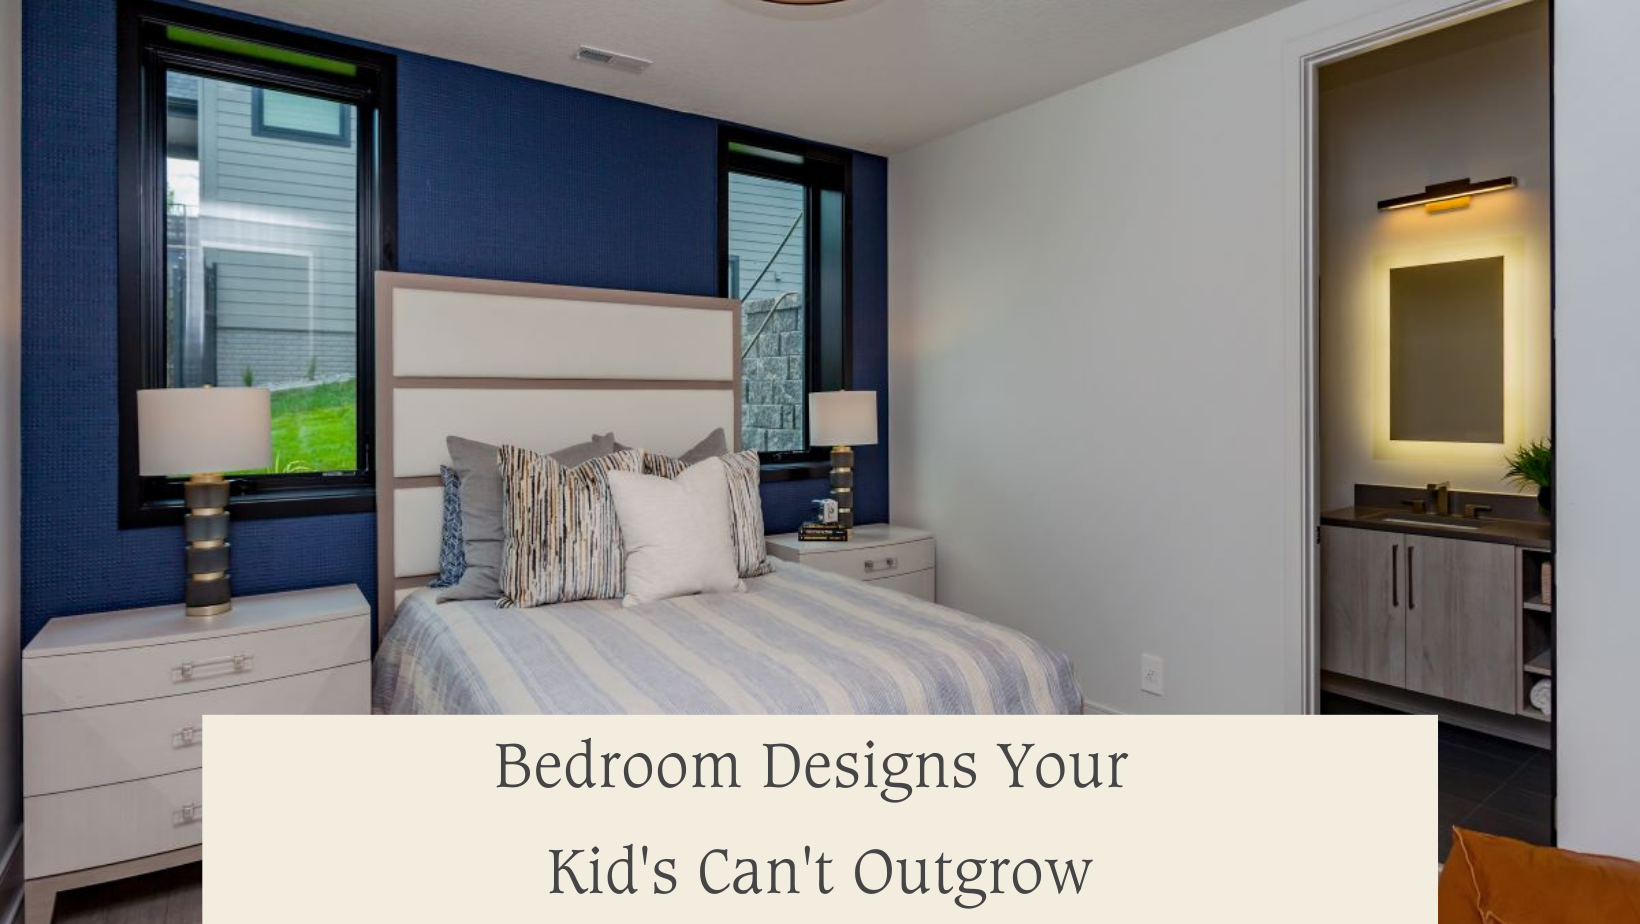 Bedrooms Designs Your Kids Can’t Outgrow